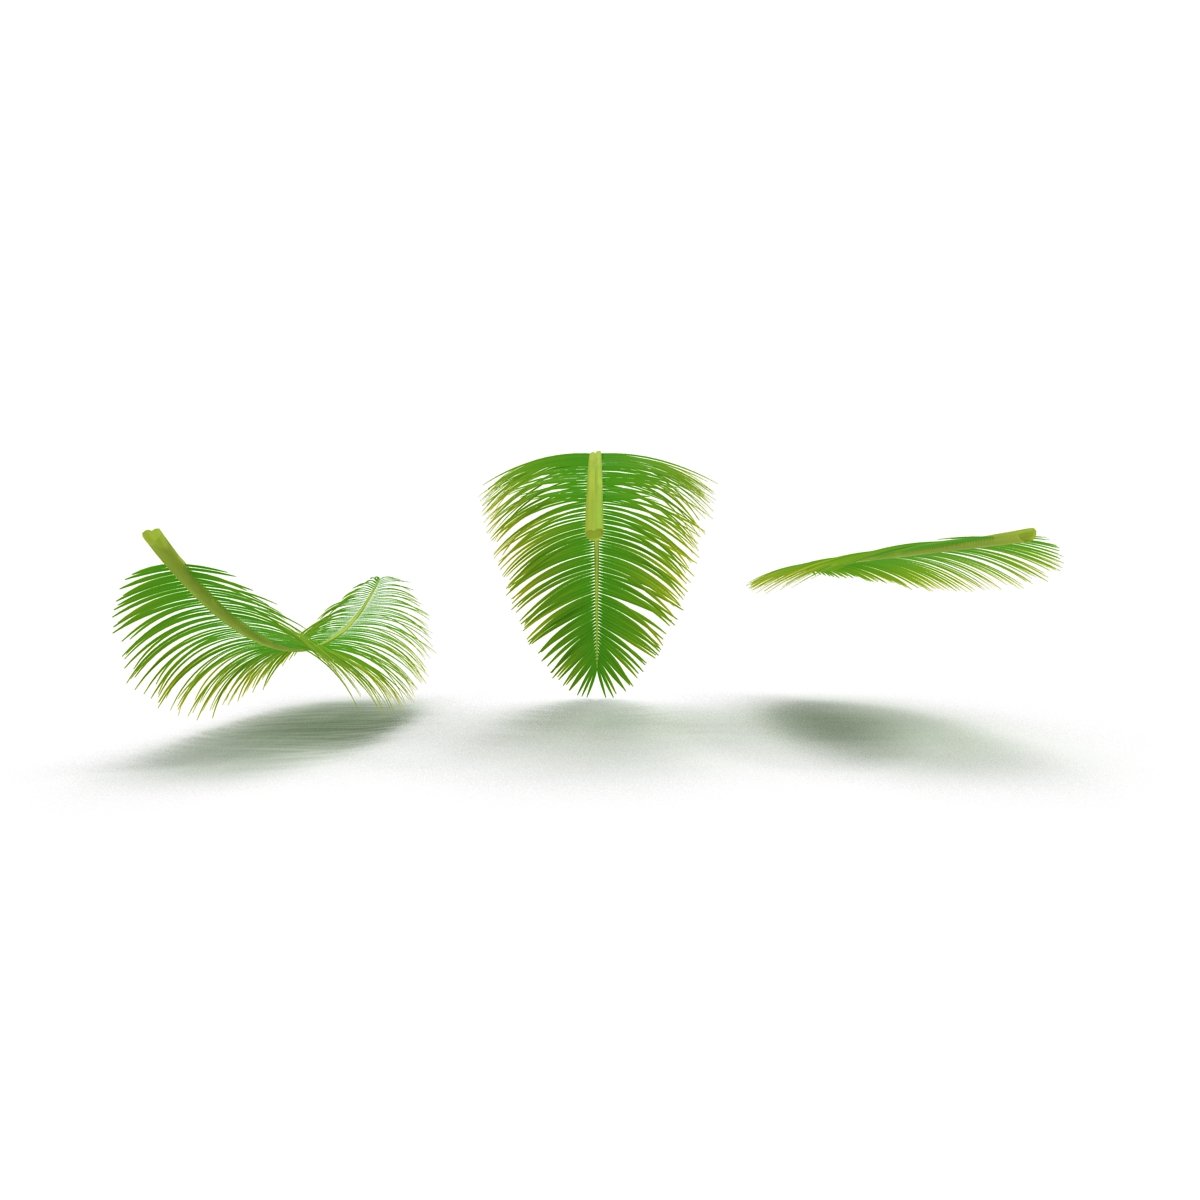 Group of three green leaves on a white background.